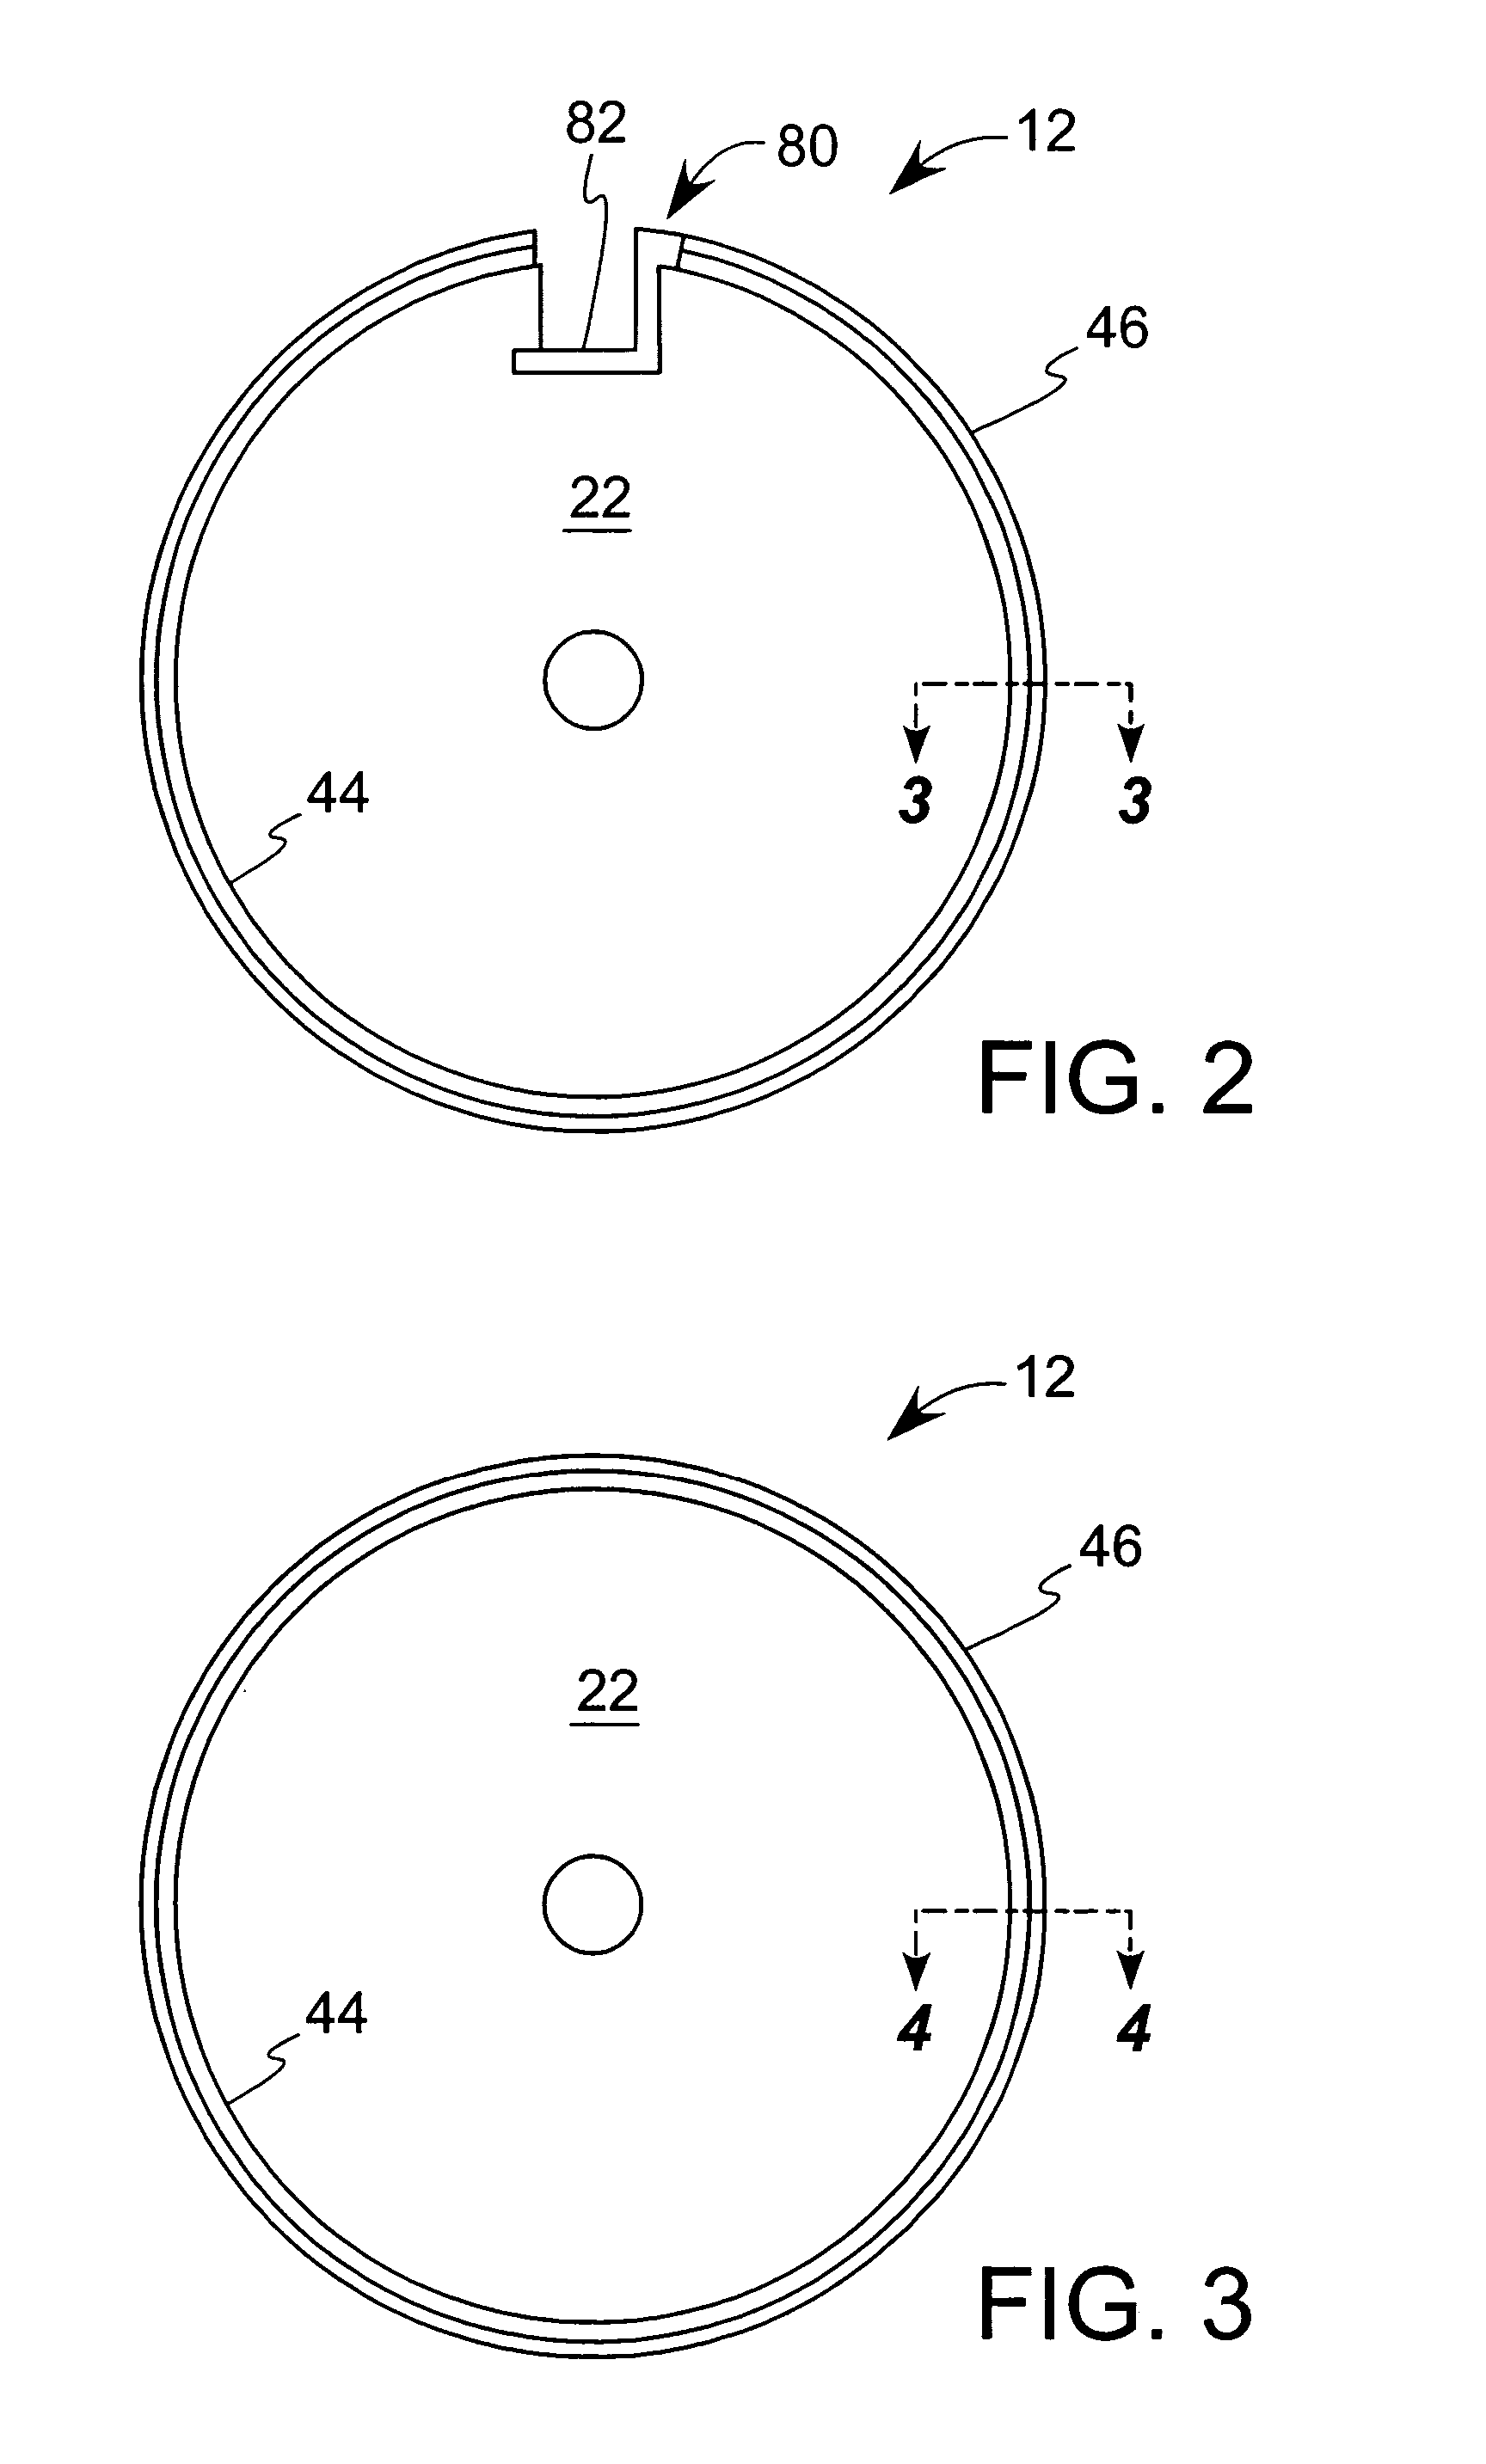 Intermediate transfer blanket for use in electrophotographic printing